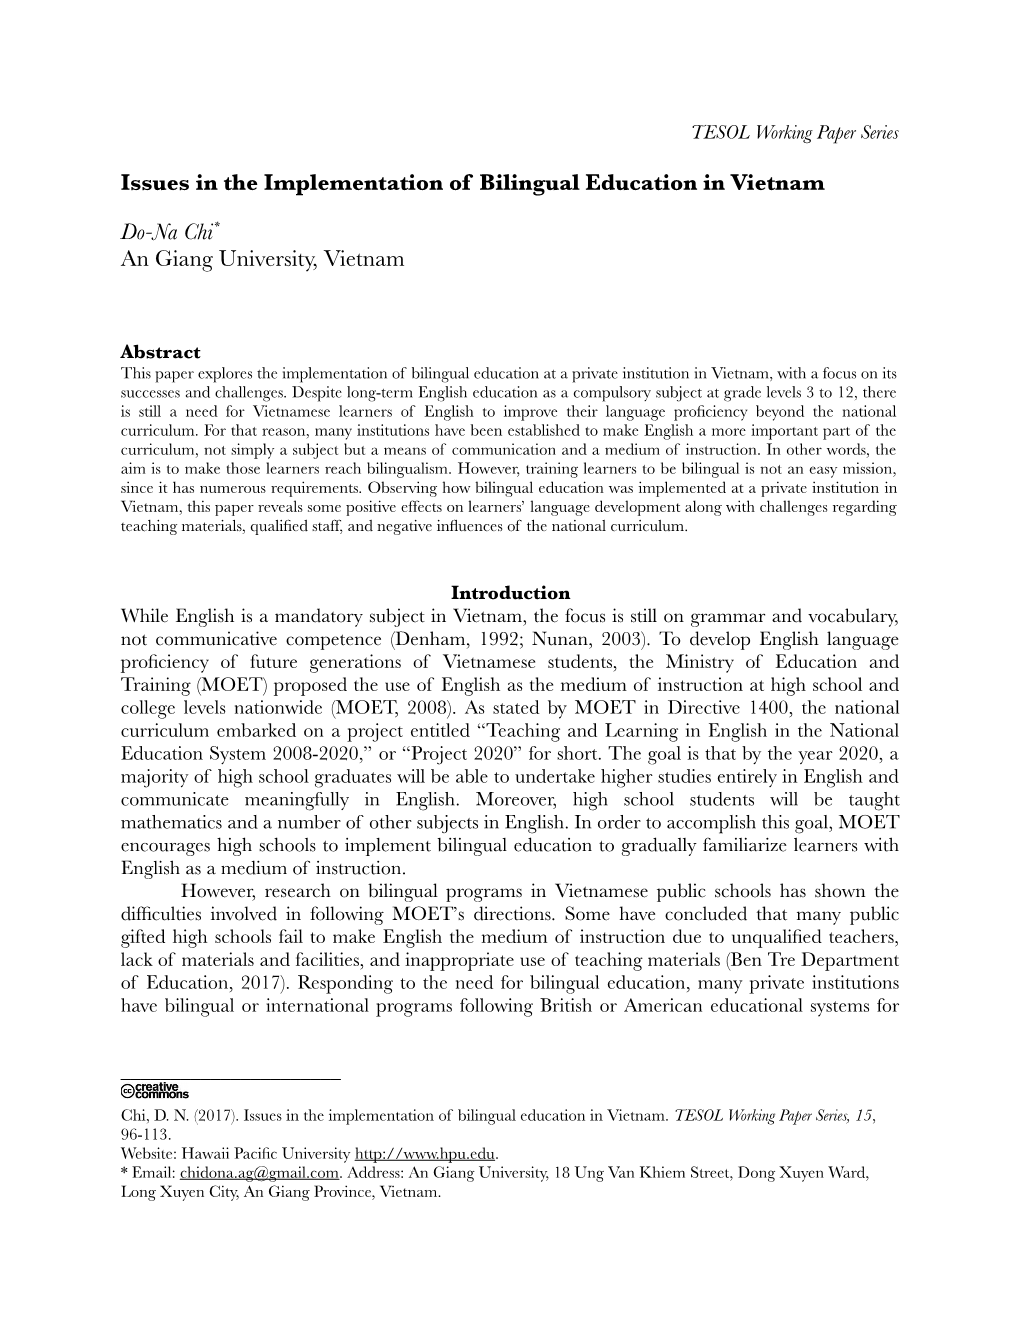 Issues in the Implementation of Bilingual Education in Vietnam